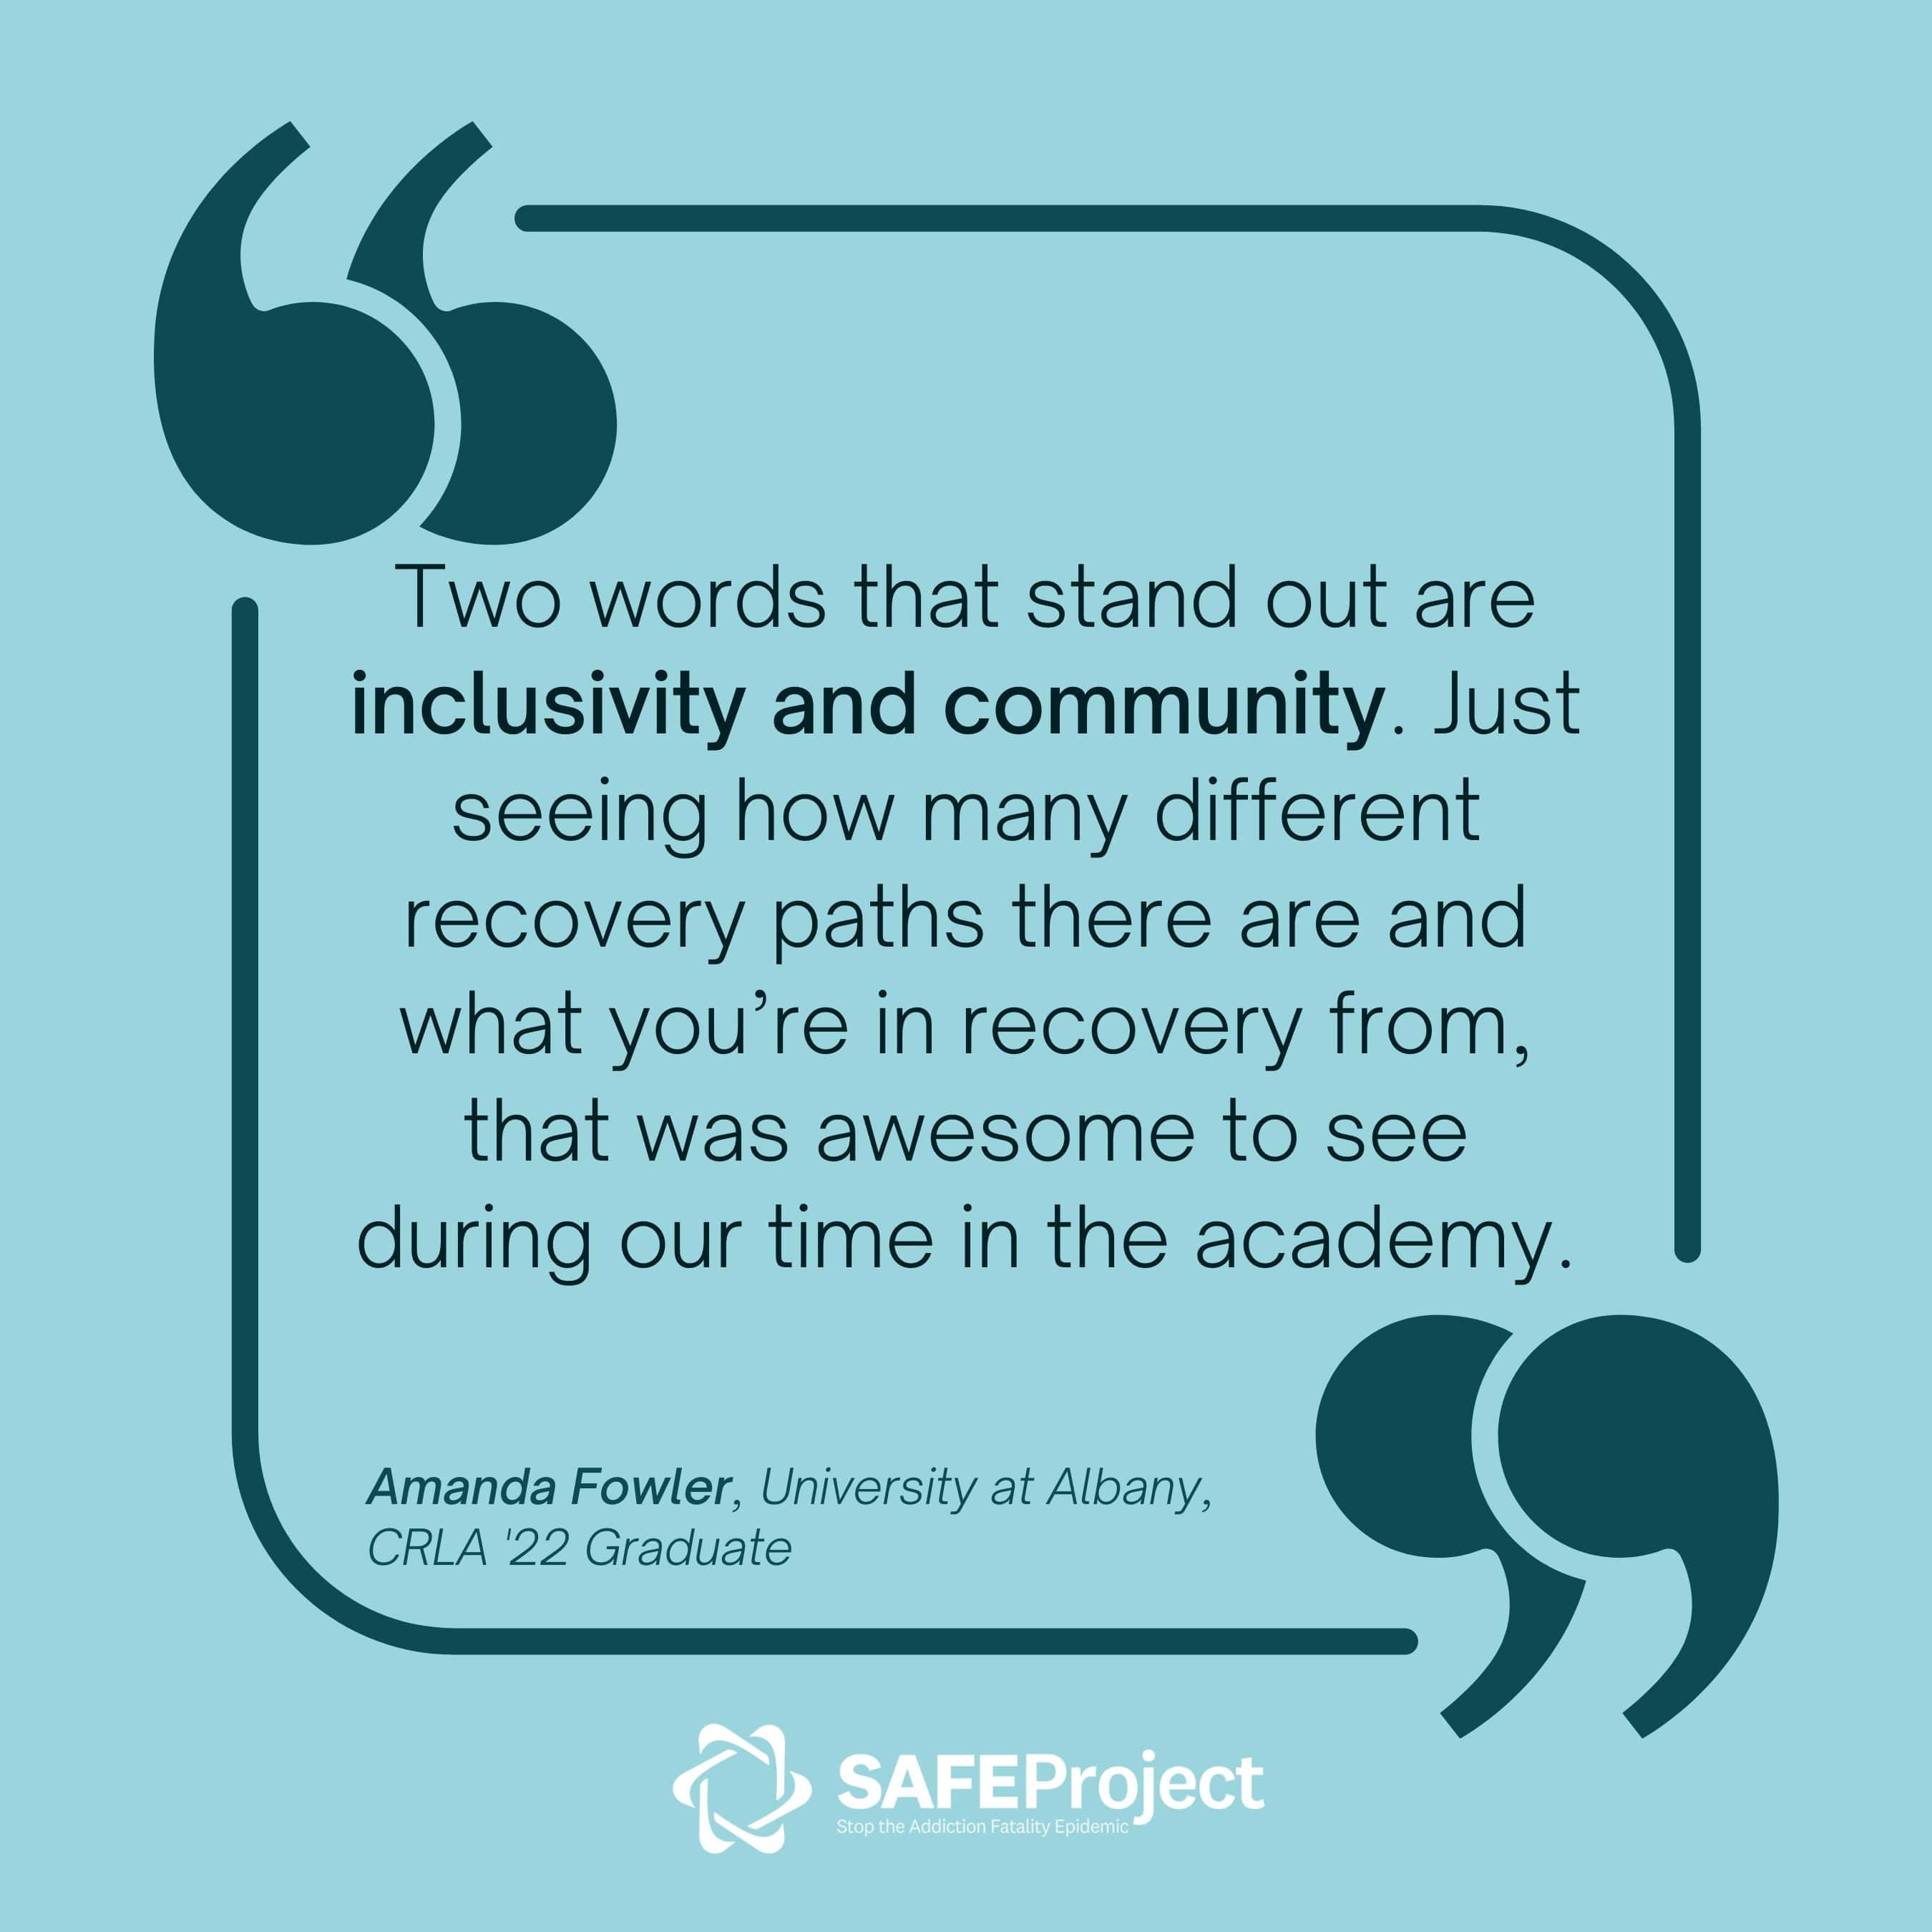 Two words that stand out are inclusivity and community. Just seeing how many different recovery paths there are and what you're in recovery from, that was awesome to see during our time in the academy.